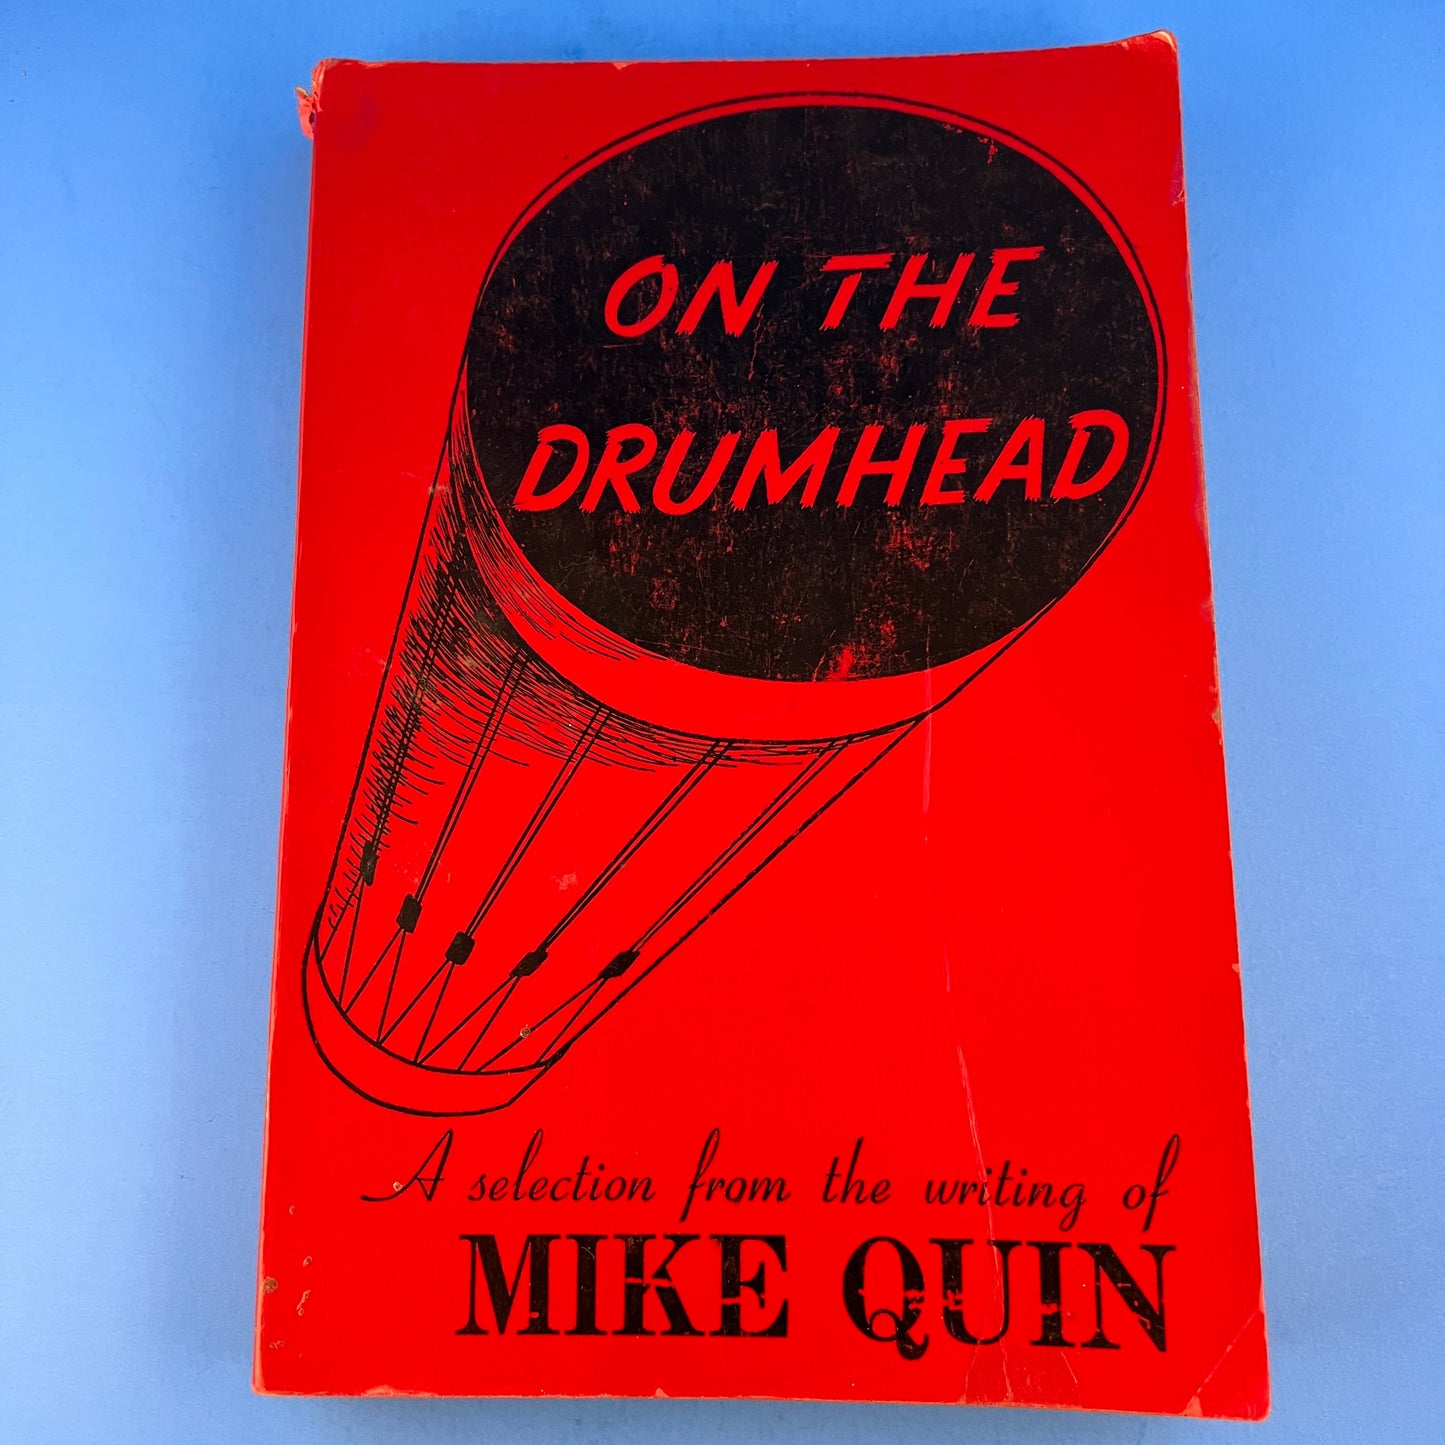 On The Drumhead: A Selection from the Writing of Mike Quin